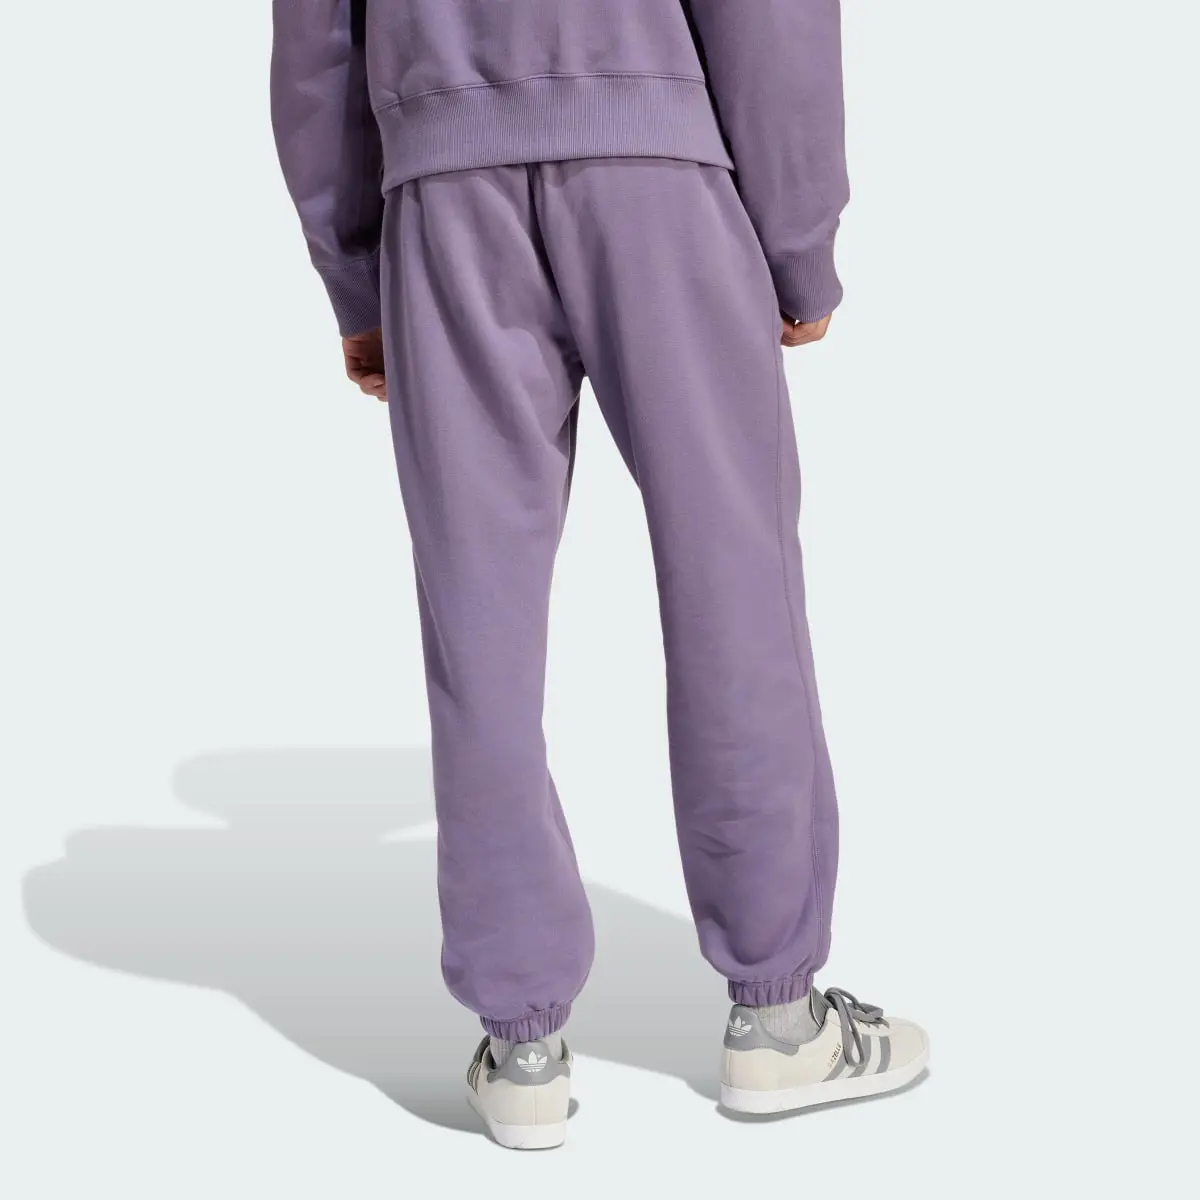 Adidas Adicolor Contempo French Terry Sweat Joggers. 2